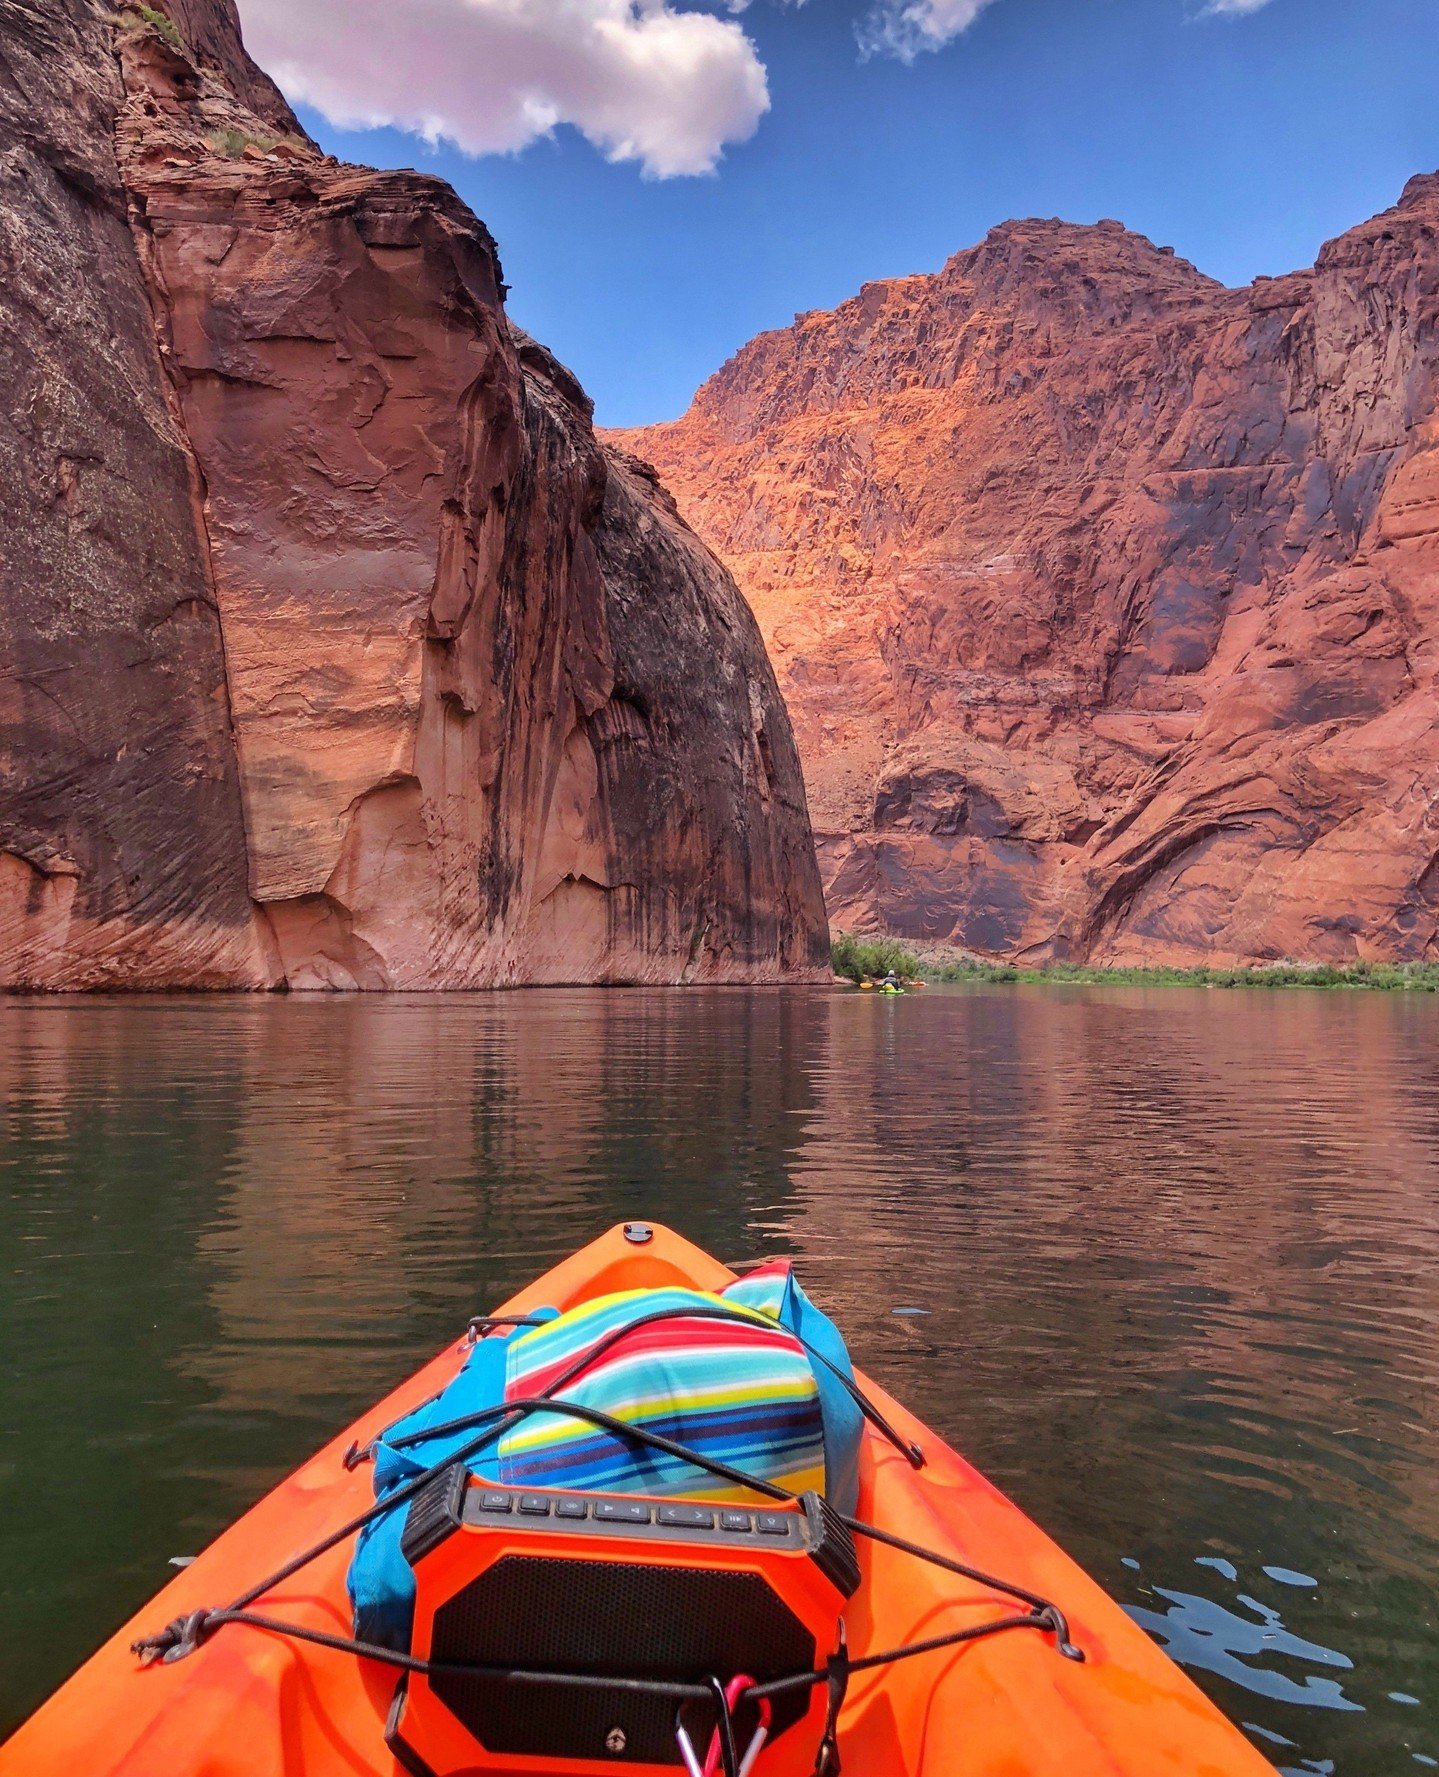 Looking for a cool dip while you're in Southern Utah? 💦 A water-based adventure is a must, and the towering sandstone walls of @glencanyonnps are just the cure for a hot summer day. ⁠
⁠
Kaying down the Colorado River through Horseshoe Bend is undoub